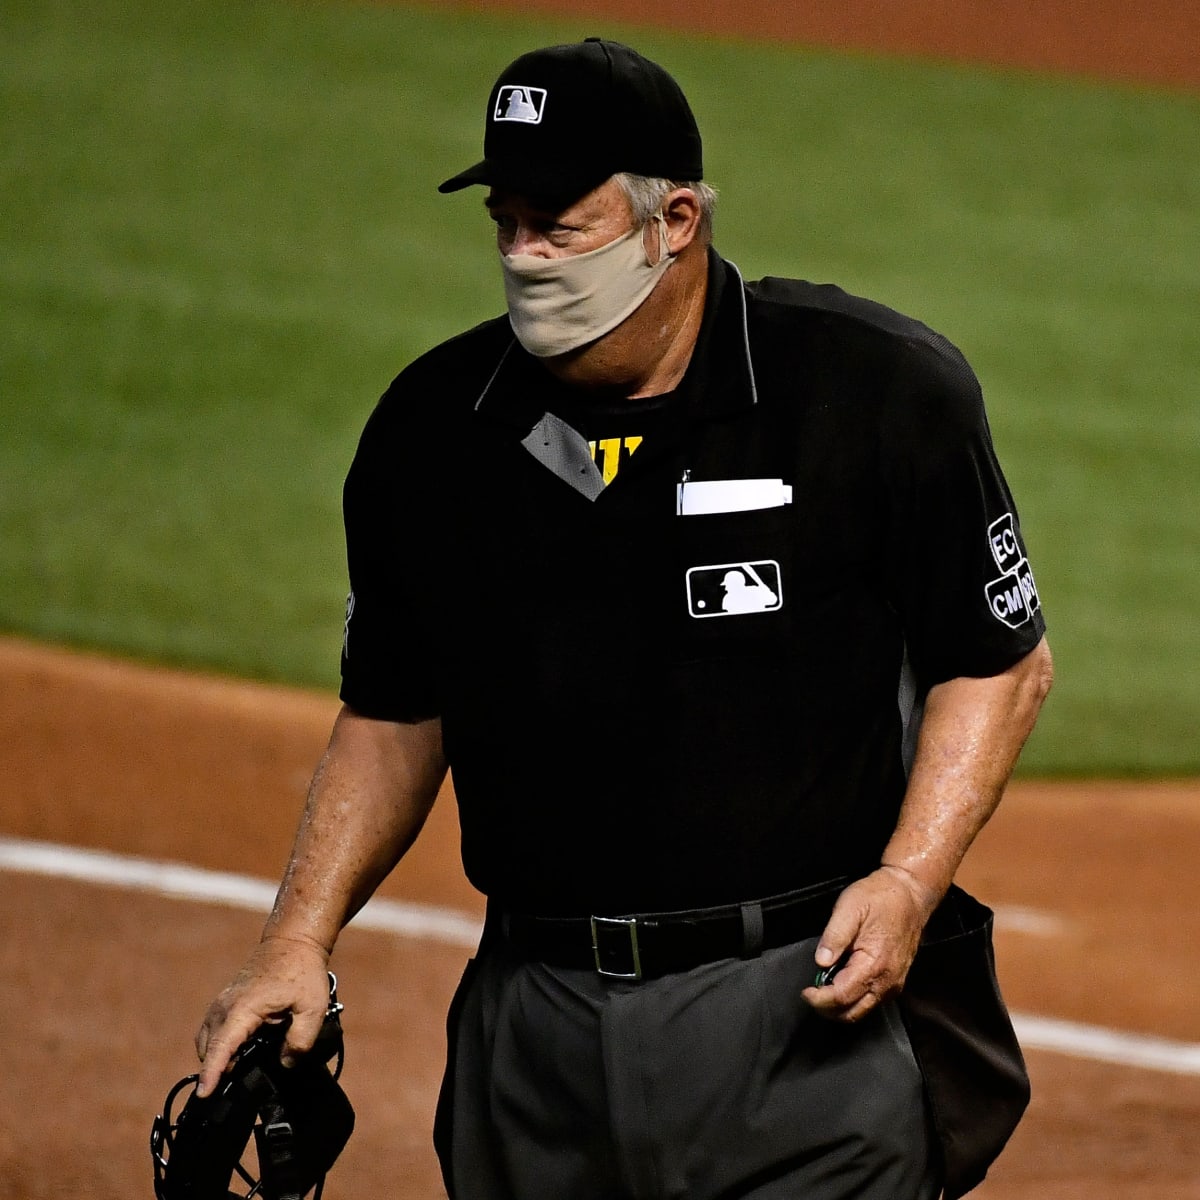 MLB umpire Joe West officially retires after 45 years - Sports